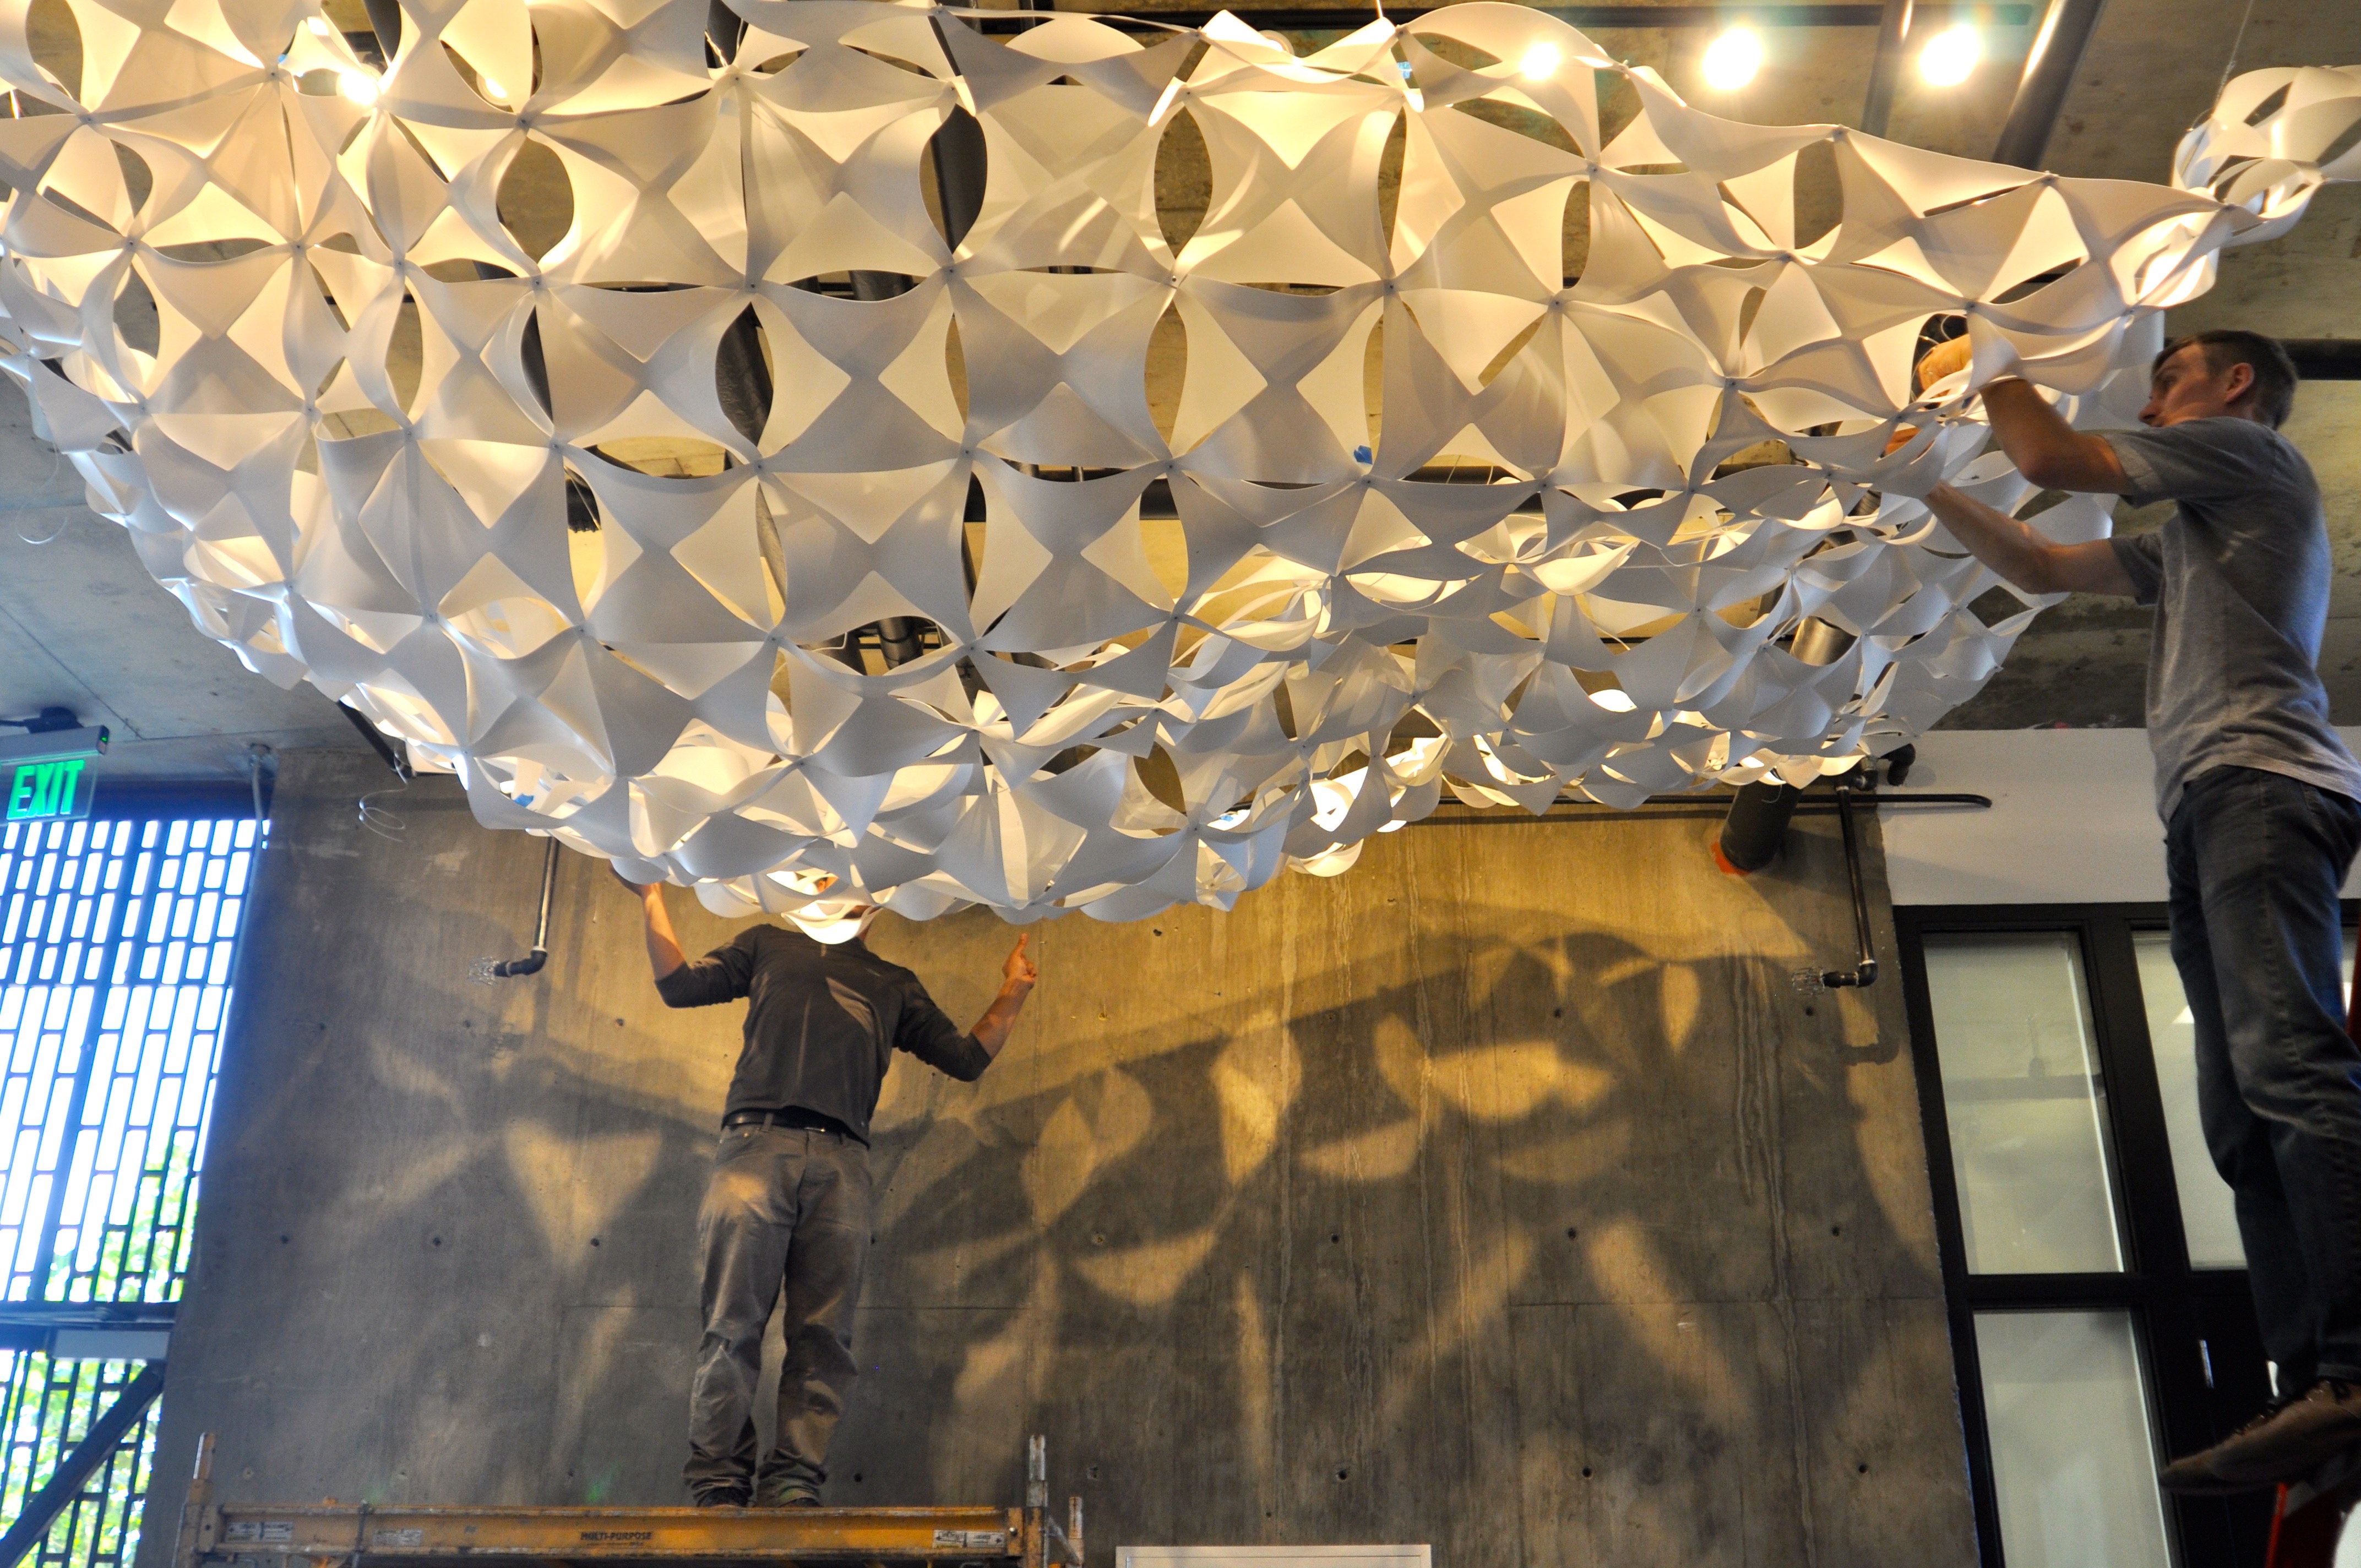 Installing of the cloud structure in the lobby of Rivermark in Sacramento, Ca.